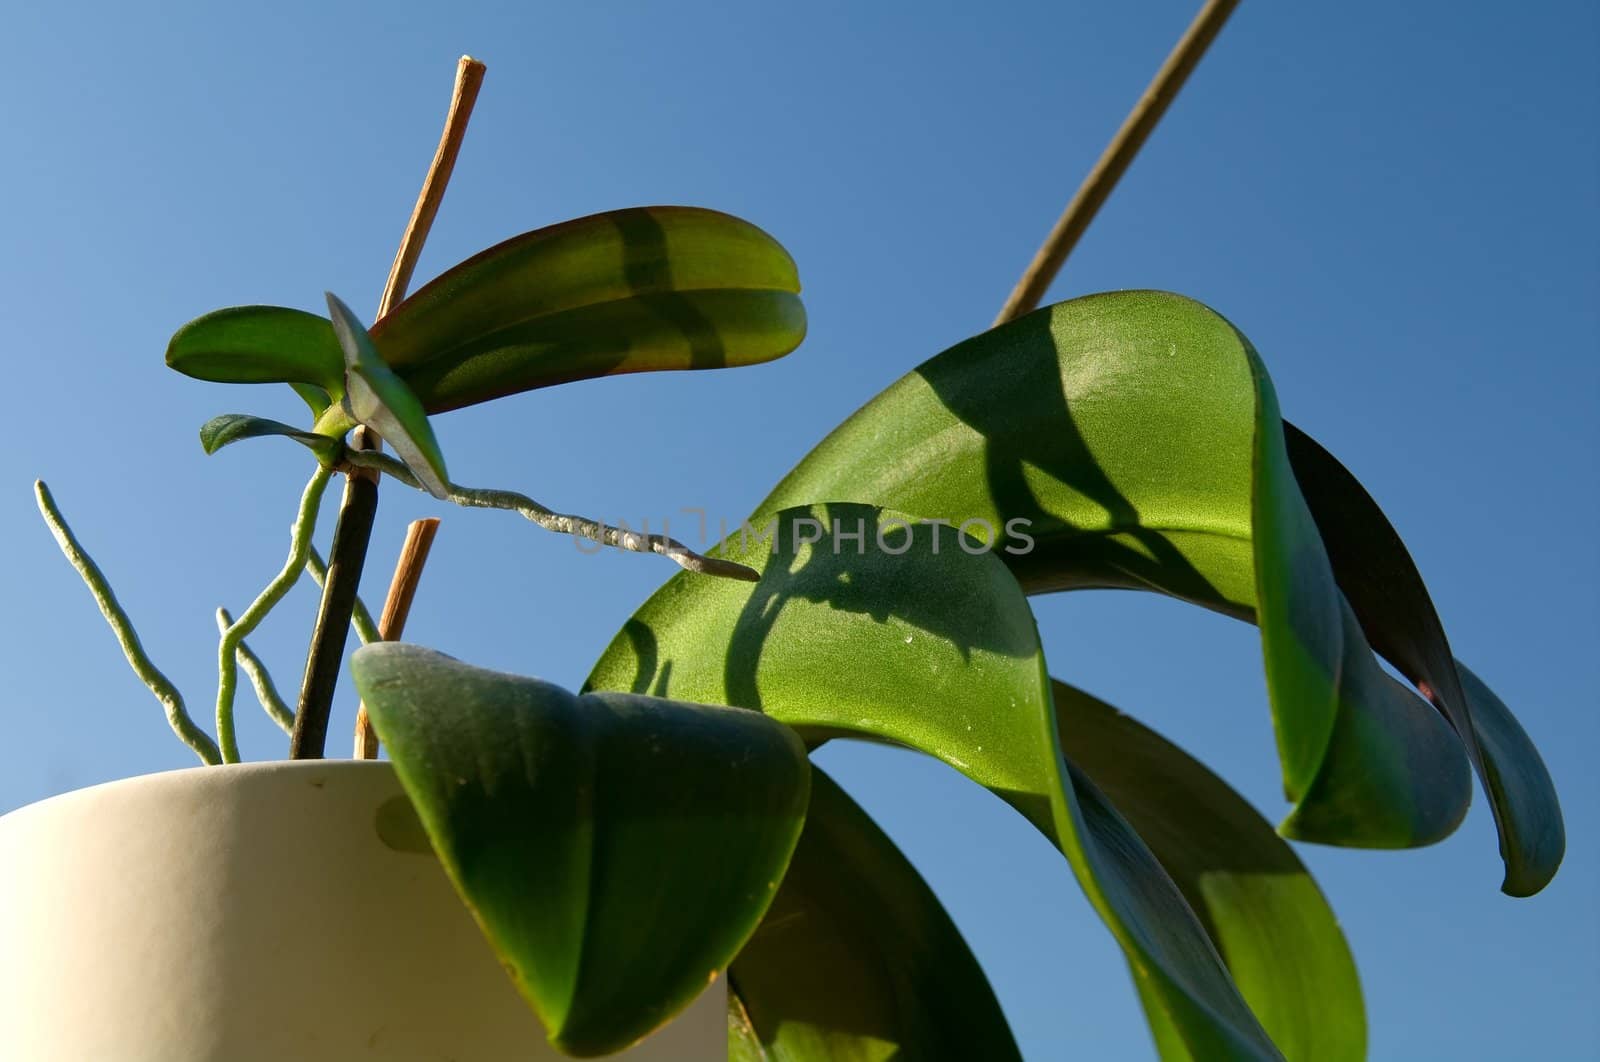 Regular Keikis on Phalaenopsis mother plant, asexually reproduced